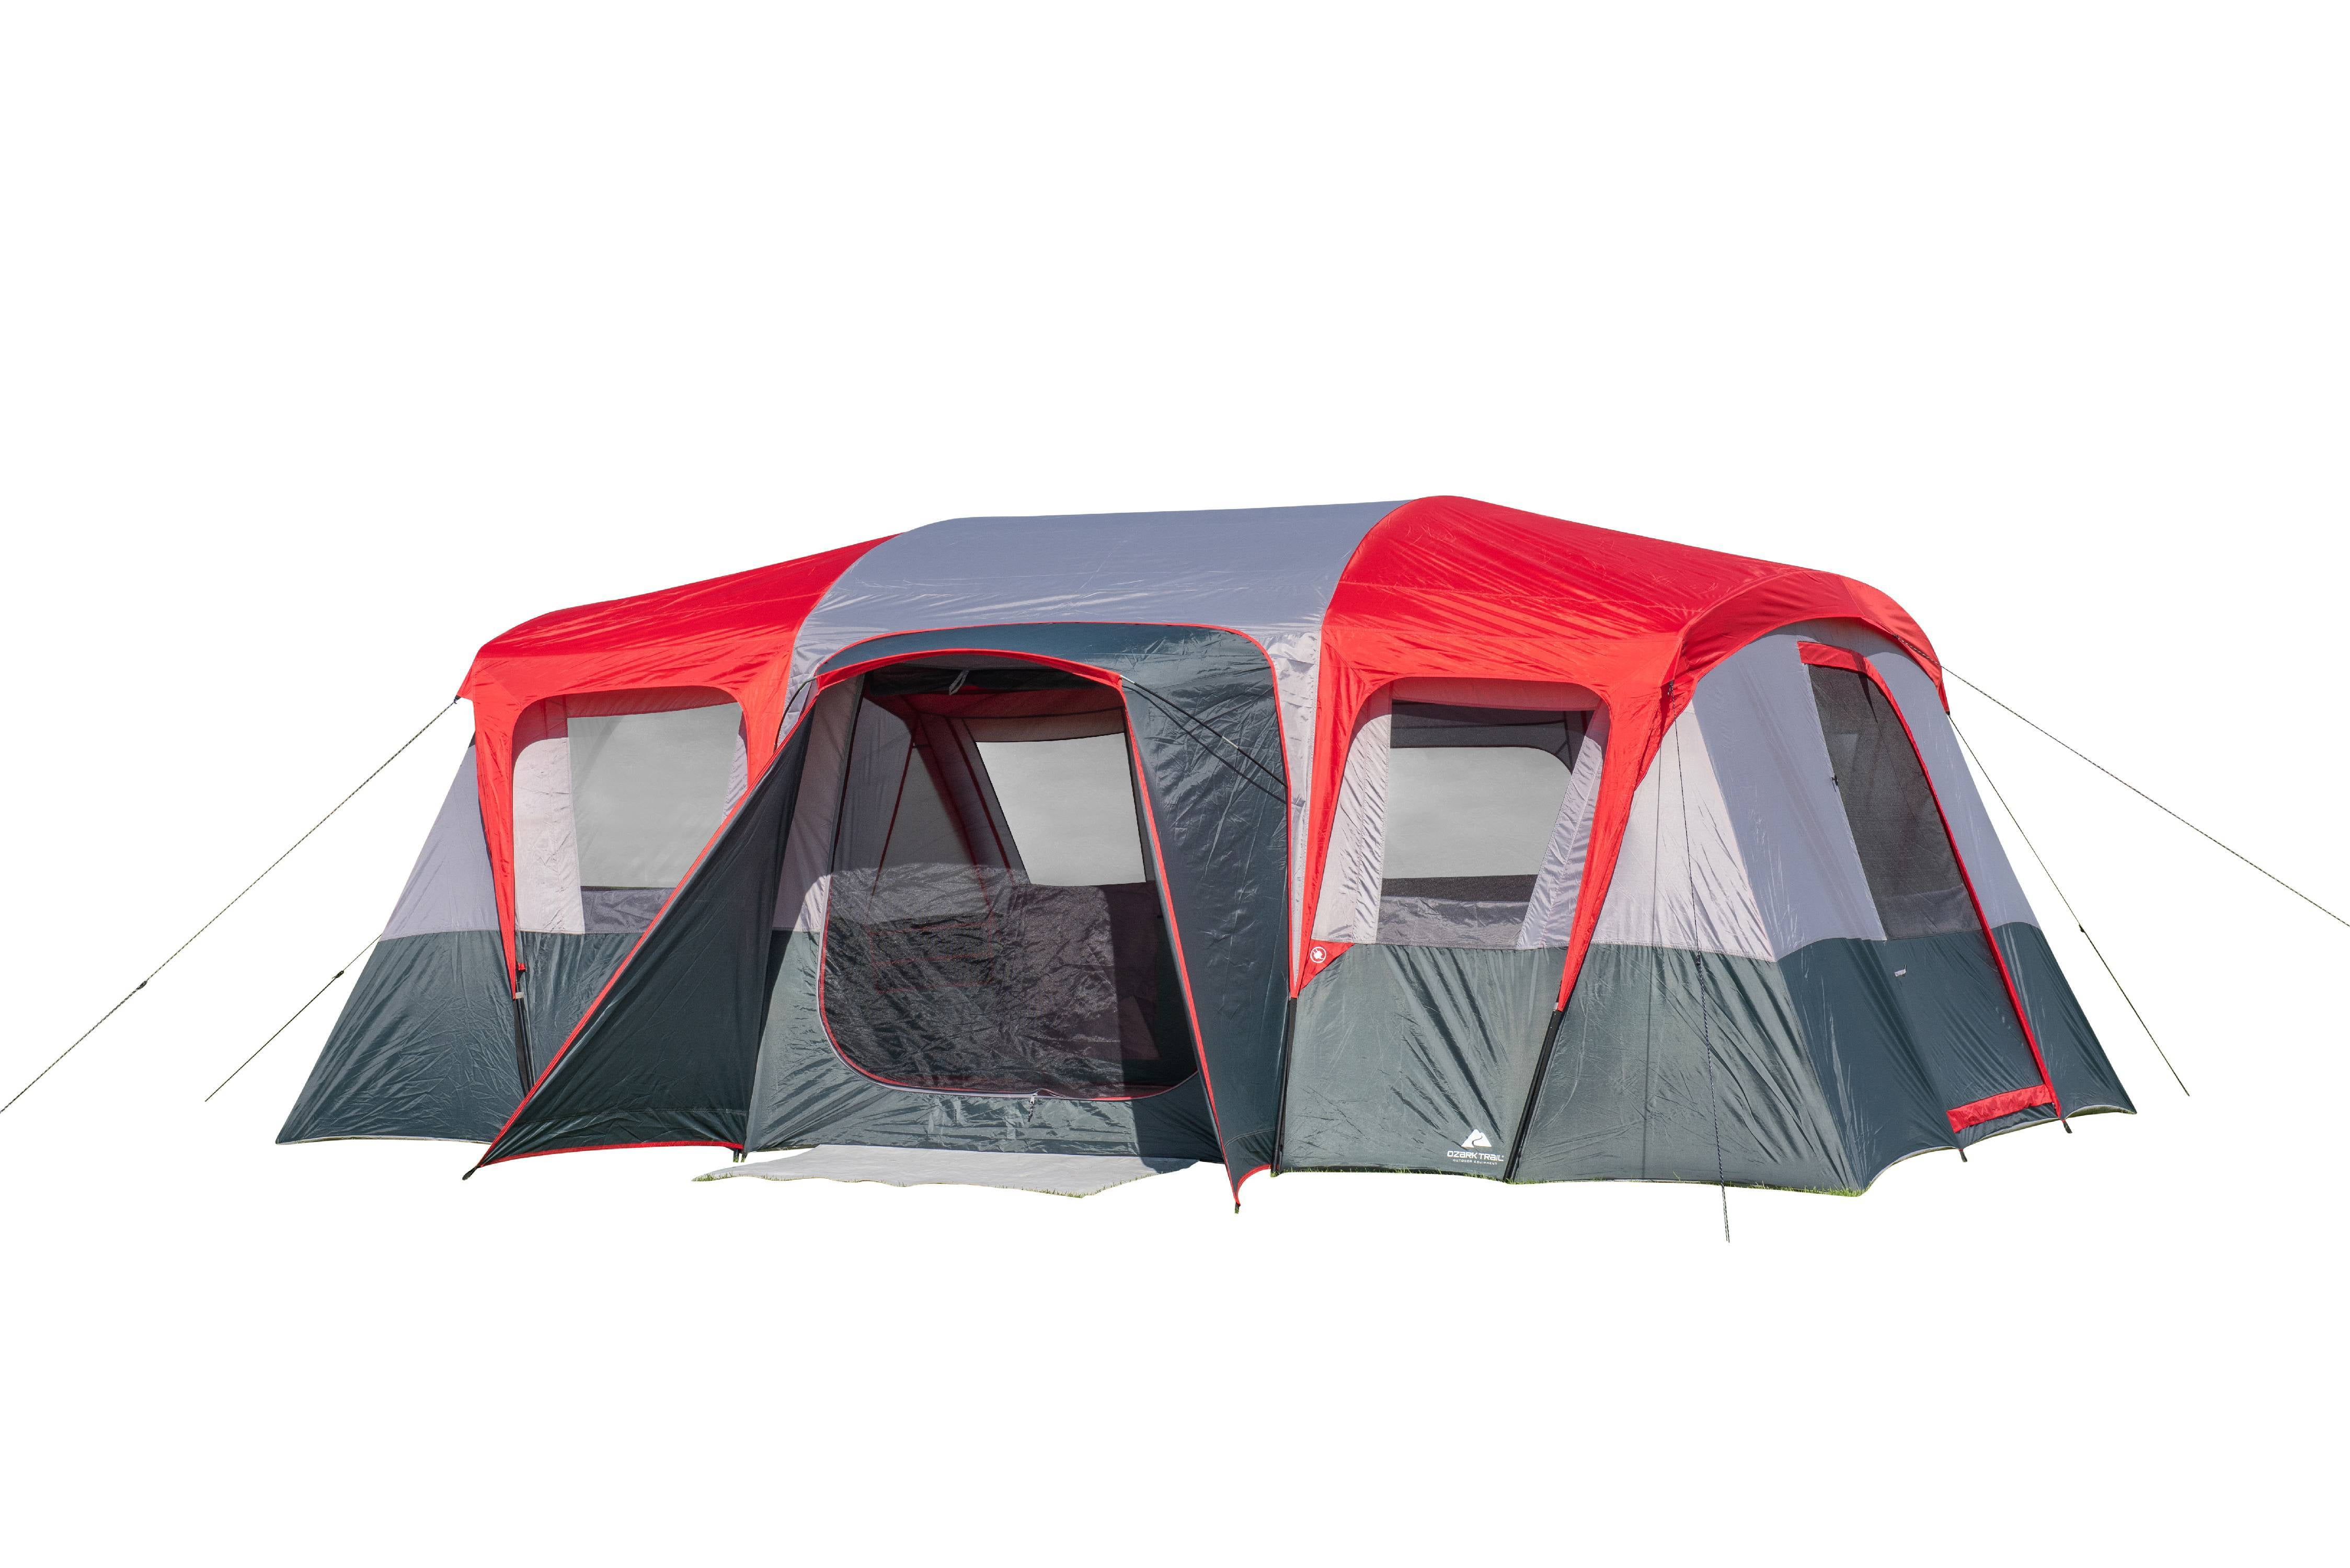 Huge Family Tents for Camping 12-13 Person Waterproof Americ Empire Cabin I...